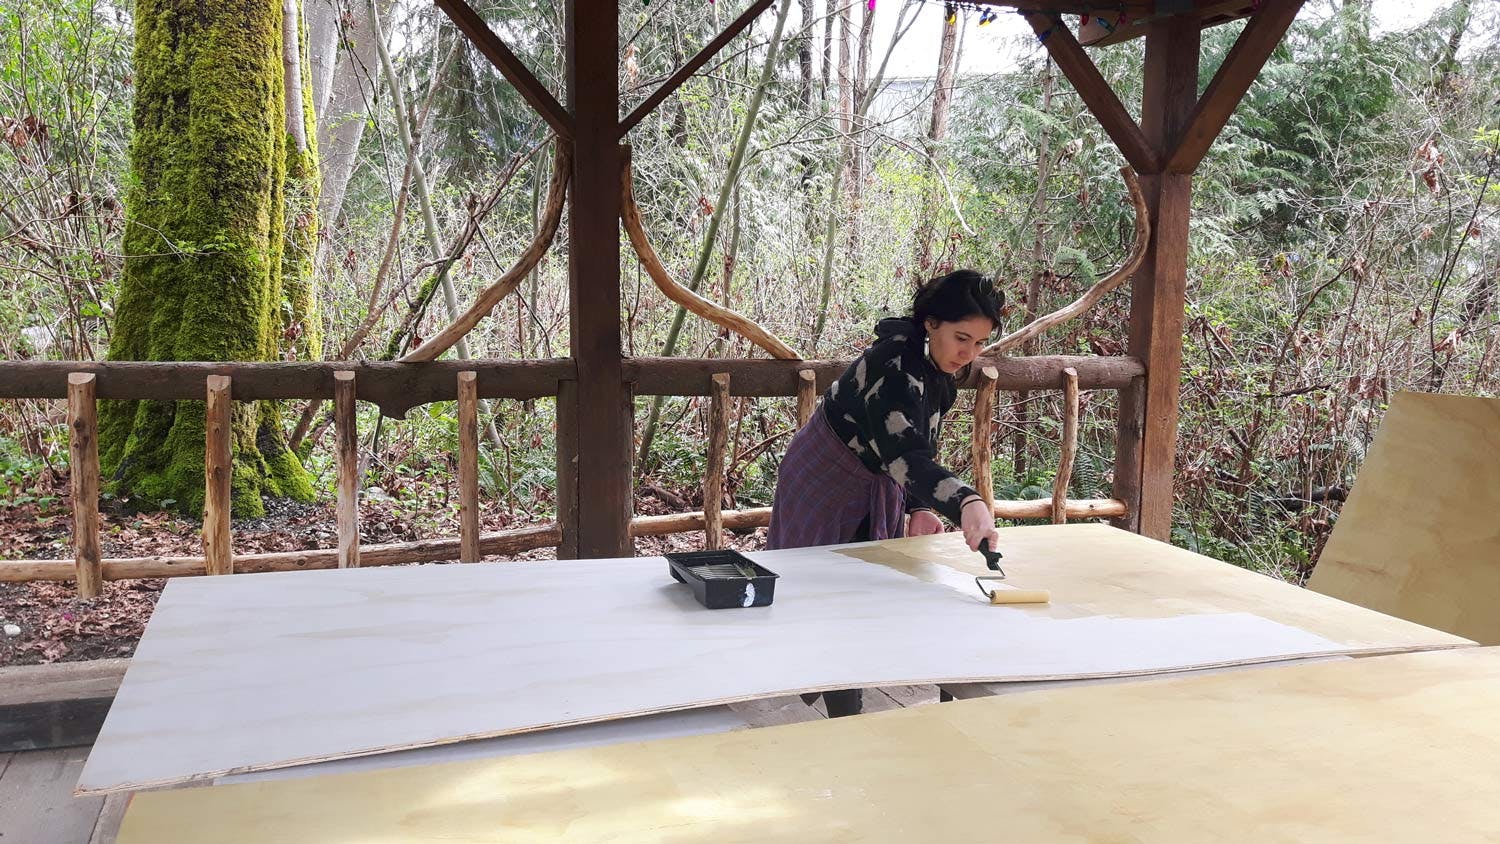 Ocean Hyland rolls primer onto large sheets of plywood under a wooden gazebo in a forest.